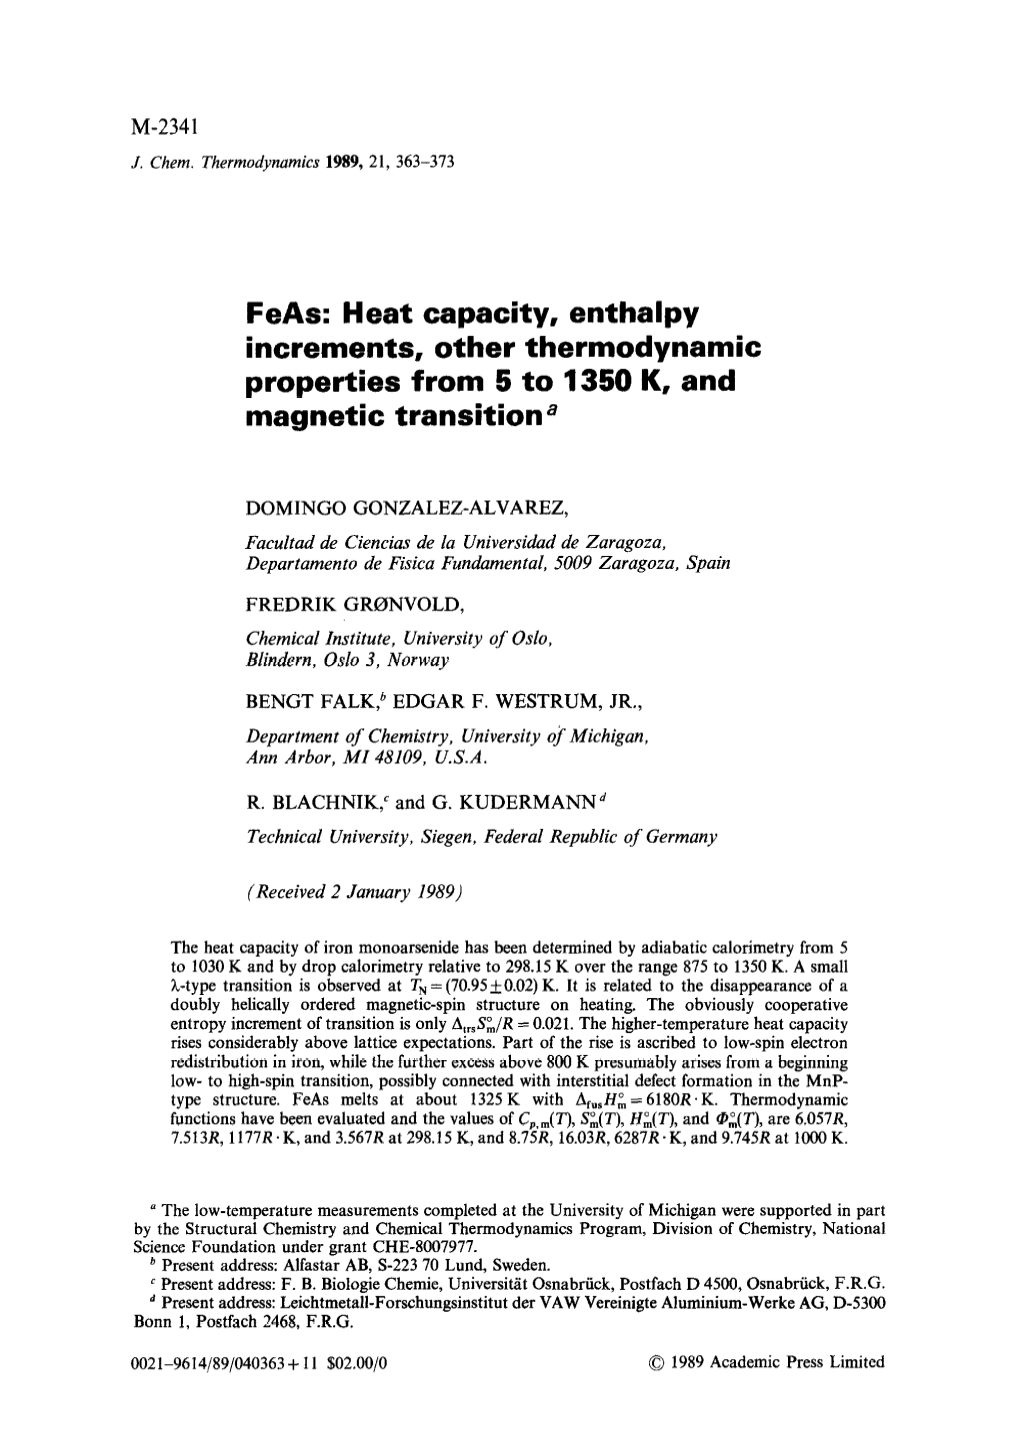 Feas: Heat Capacity, Enthalpy Increments, Other Thermodynamic Properties from 5 to 1350 K, and Magnetic Transition A